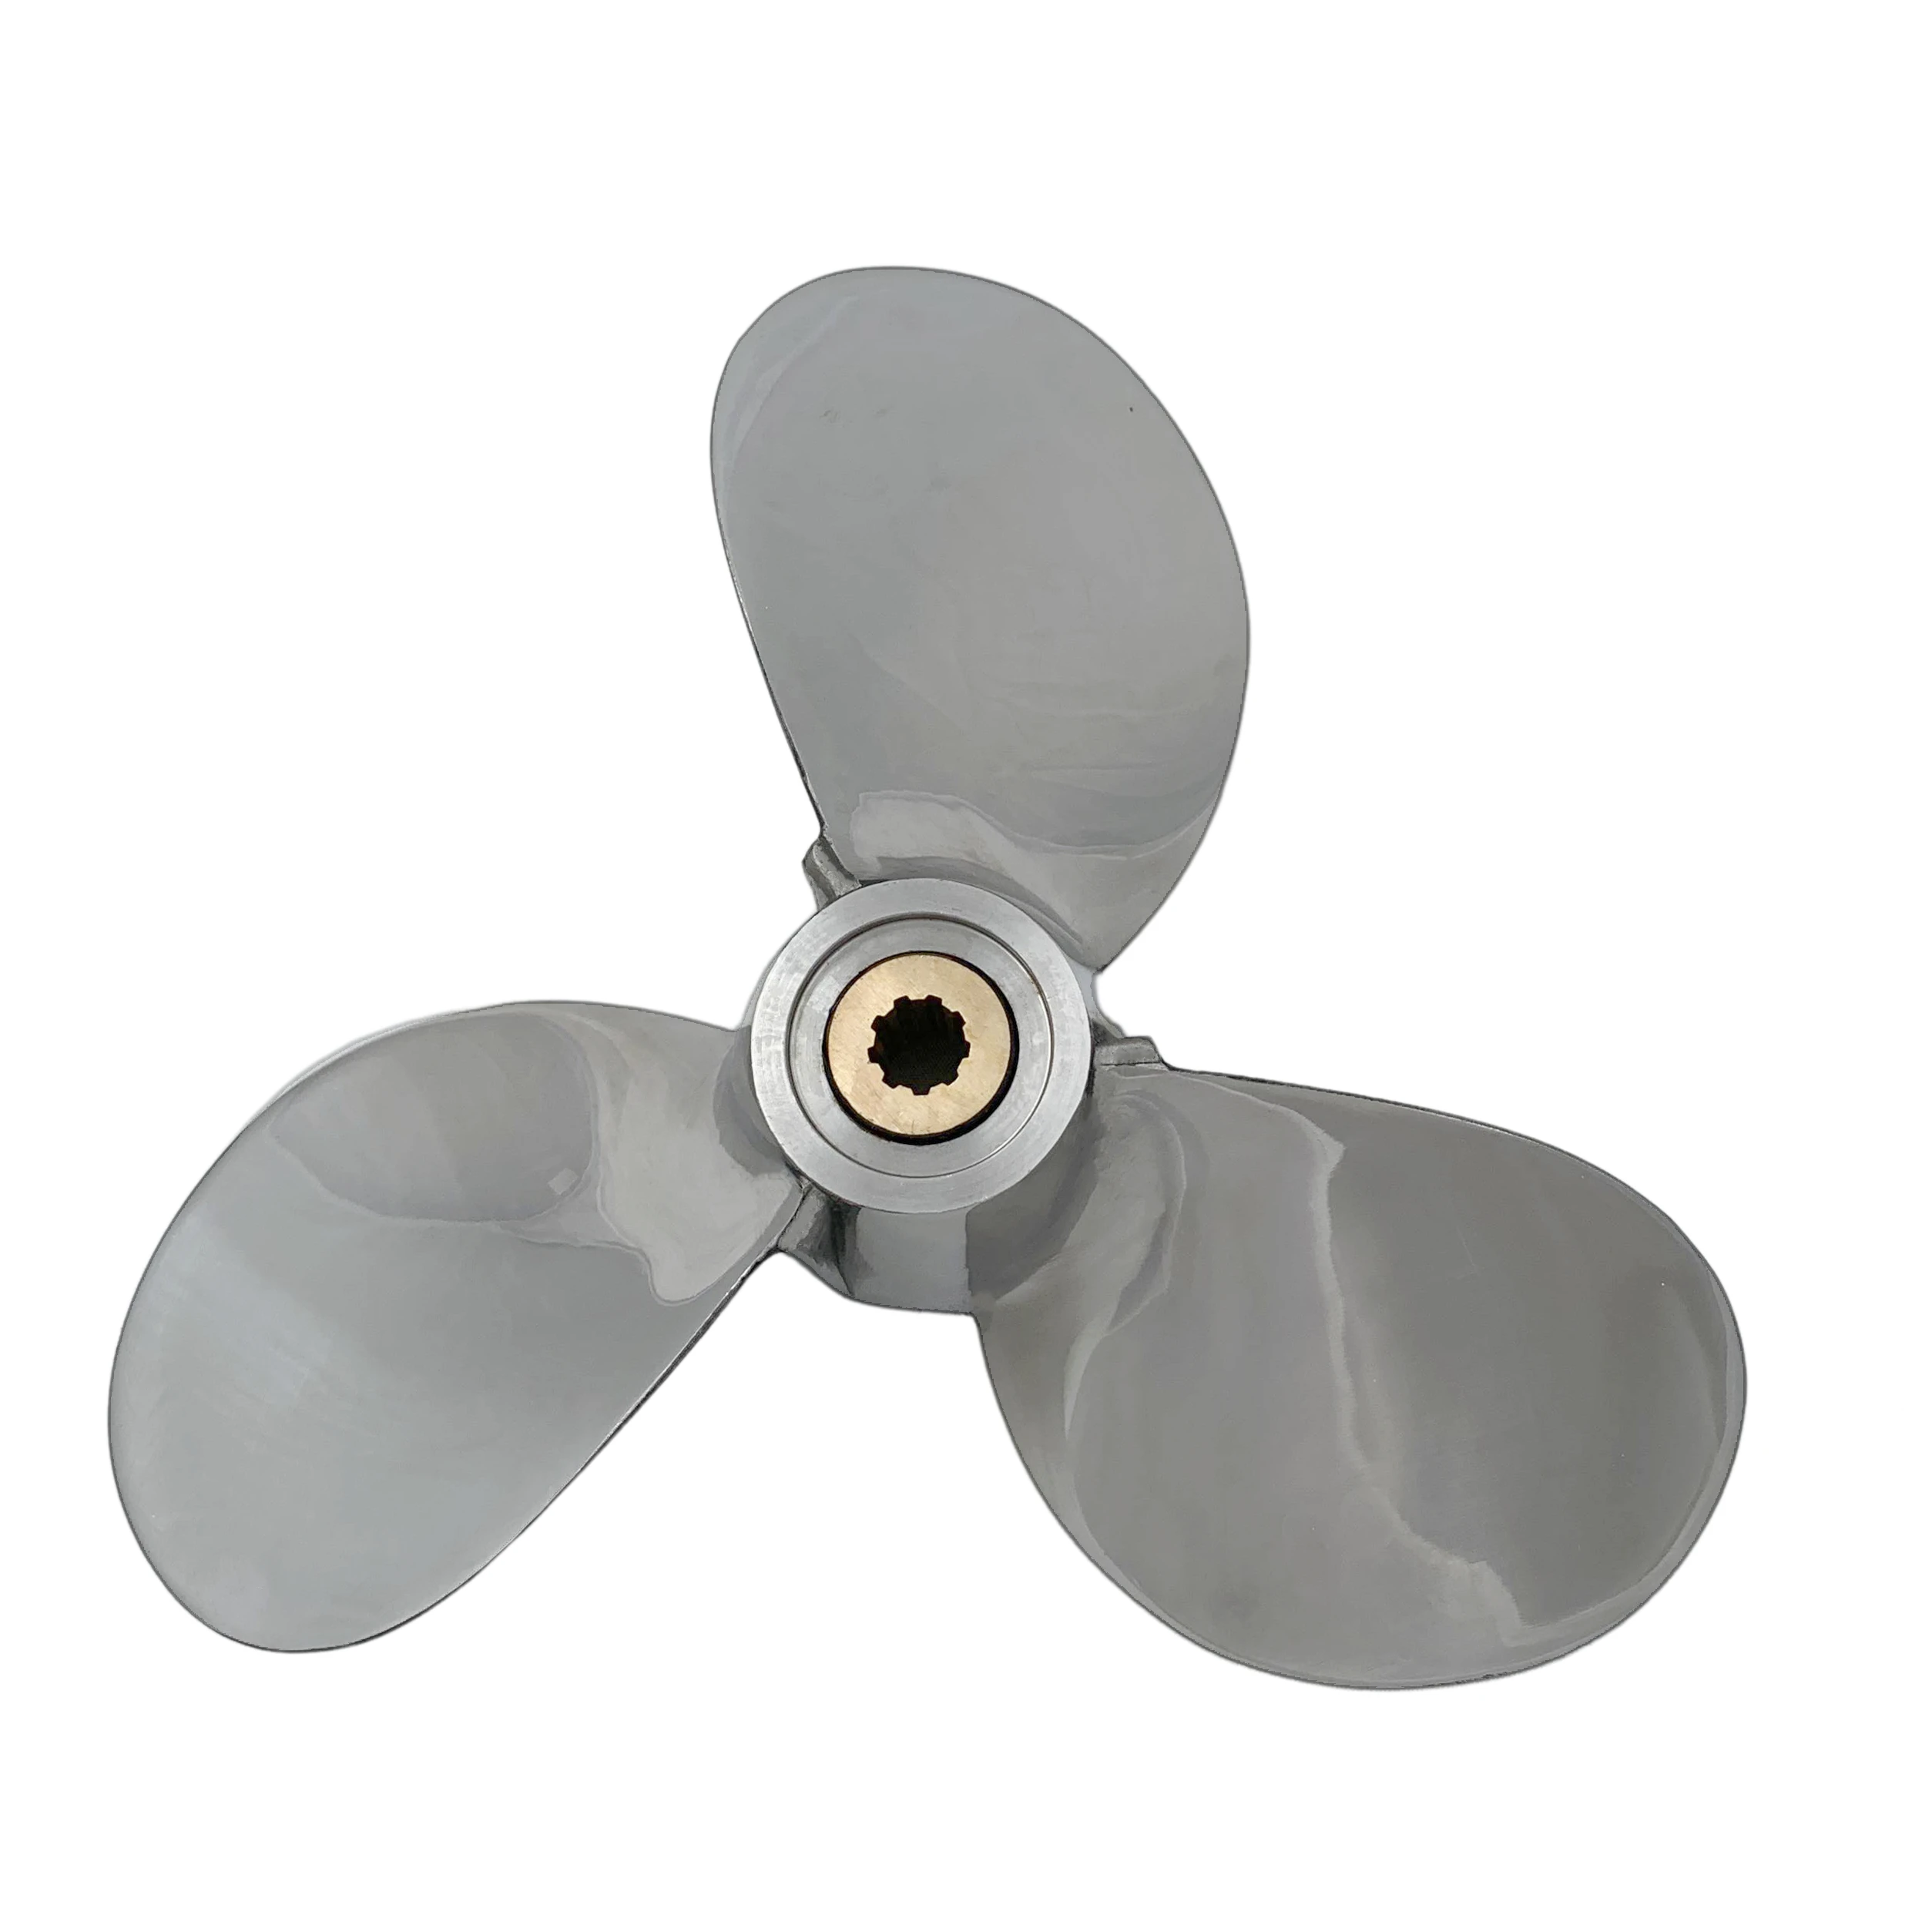 Boat Propeller Suit For Yamaha 7 1/2X8 Stainless Steel Prop 2.5-6HP 3 Blade 9 Tooth Rh Oem No: 6E0-45941-01-El